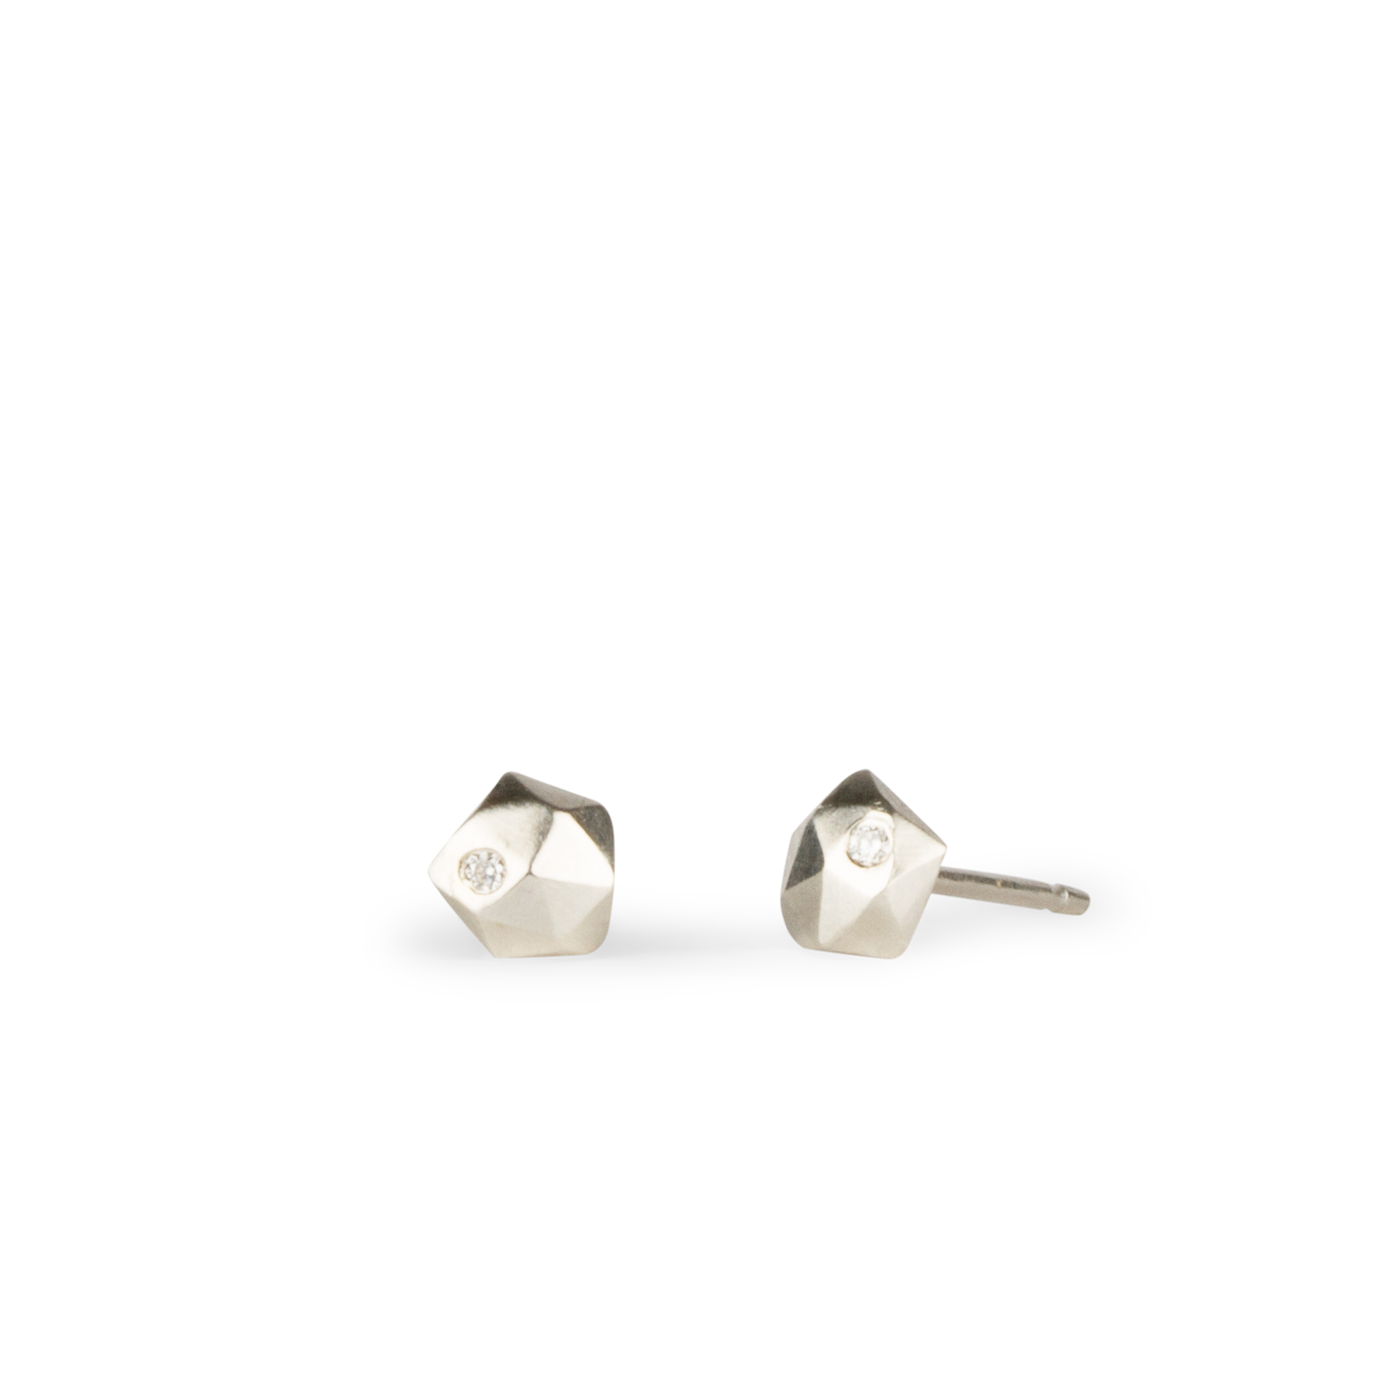 sterling silver micro size geometric faceted stud earrings with a single flush set diamond by Corey Egan on a white background